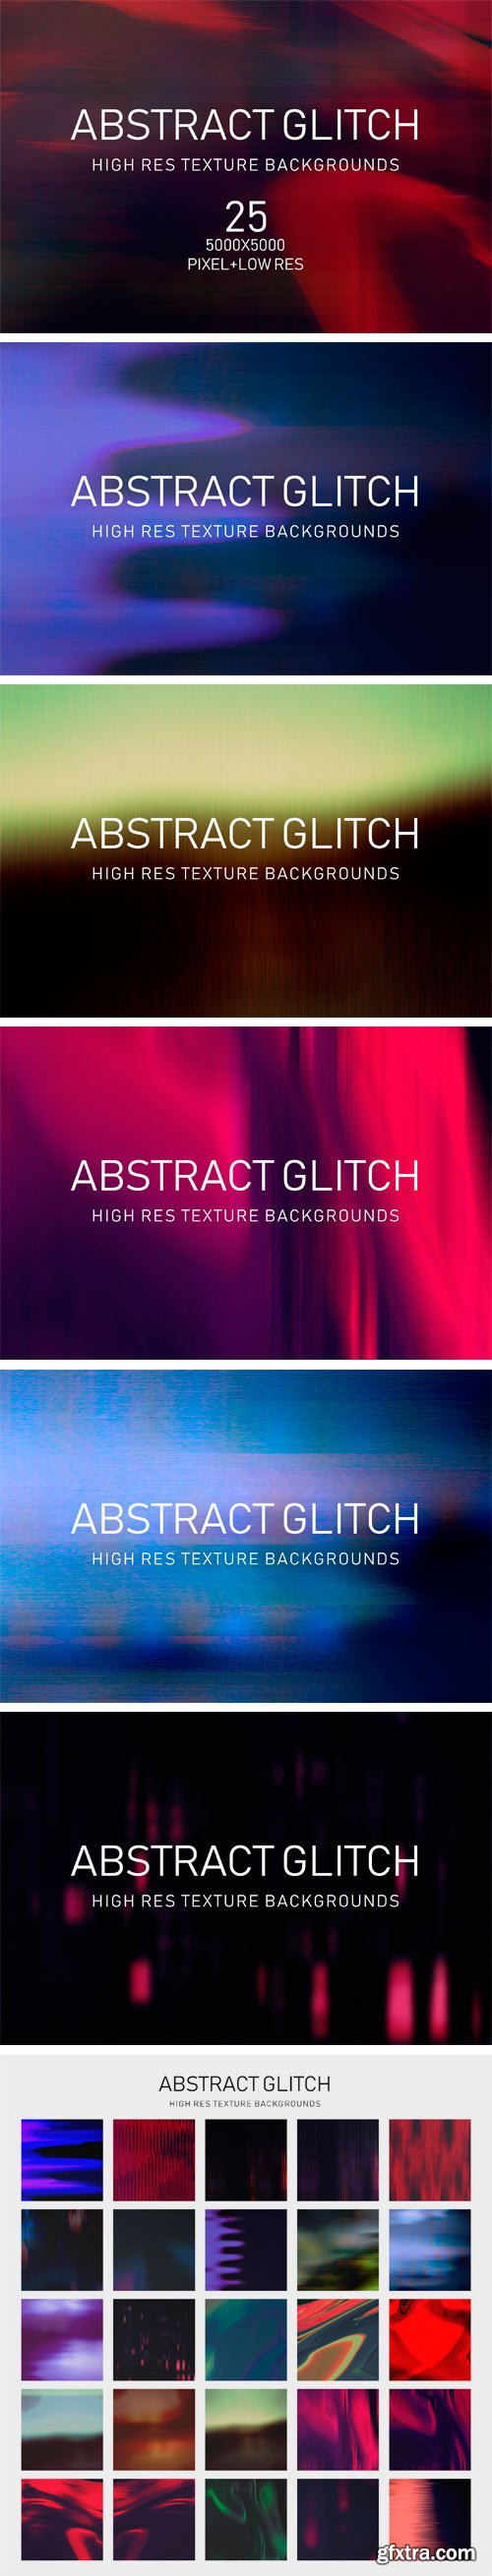 CM - Abstract Glitch Texture Collection 2350354